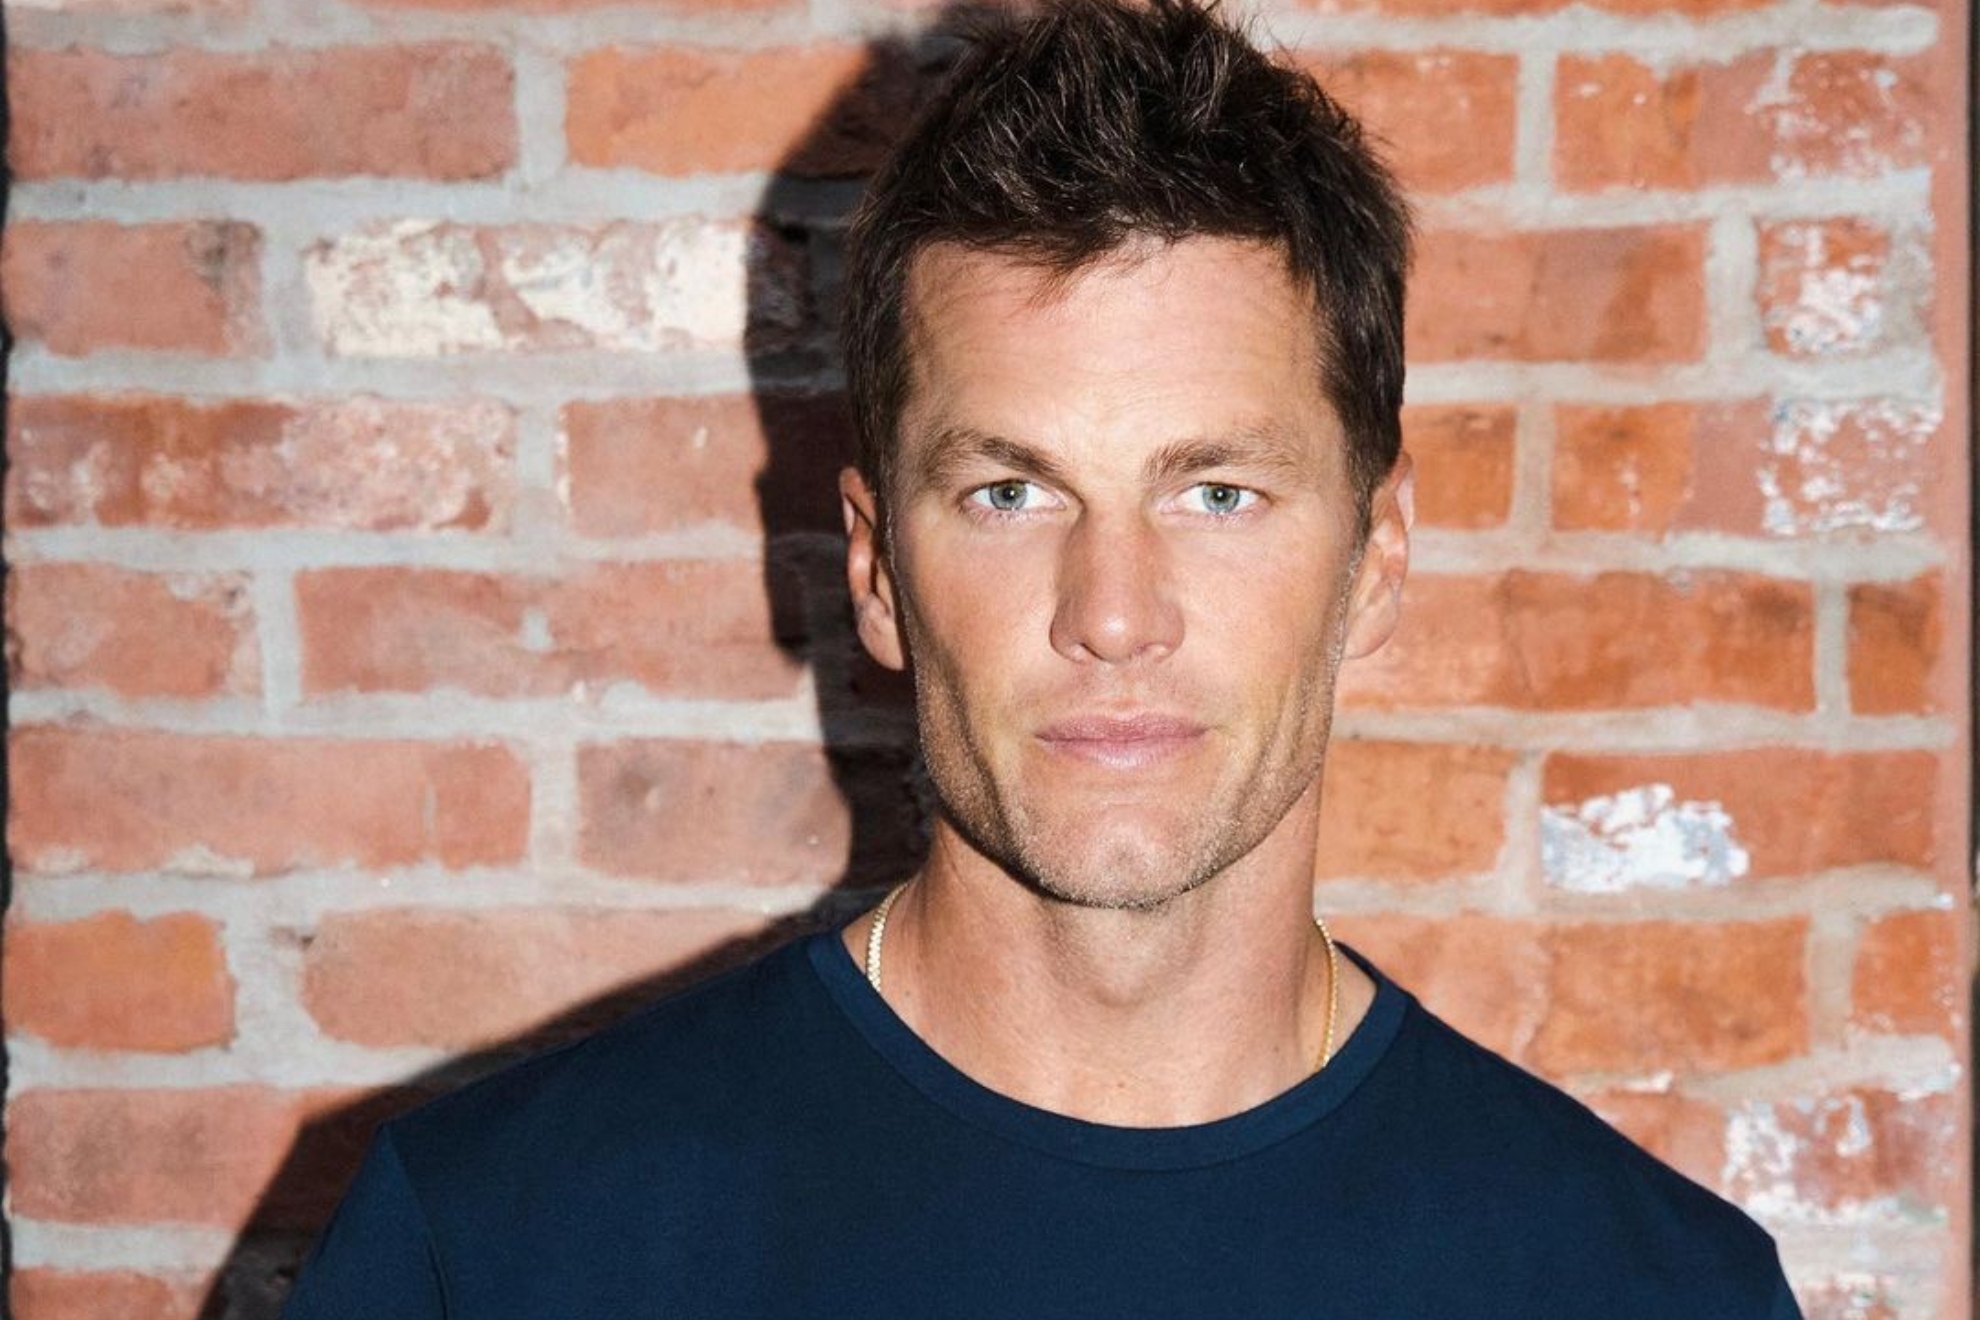 Tom Brady's love life heats up amid rumors of new relationship with a mysterious blonde